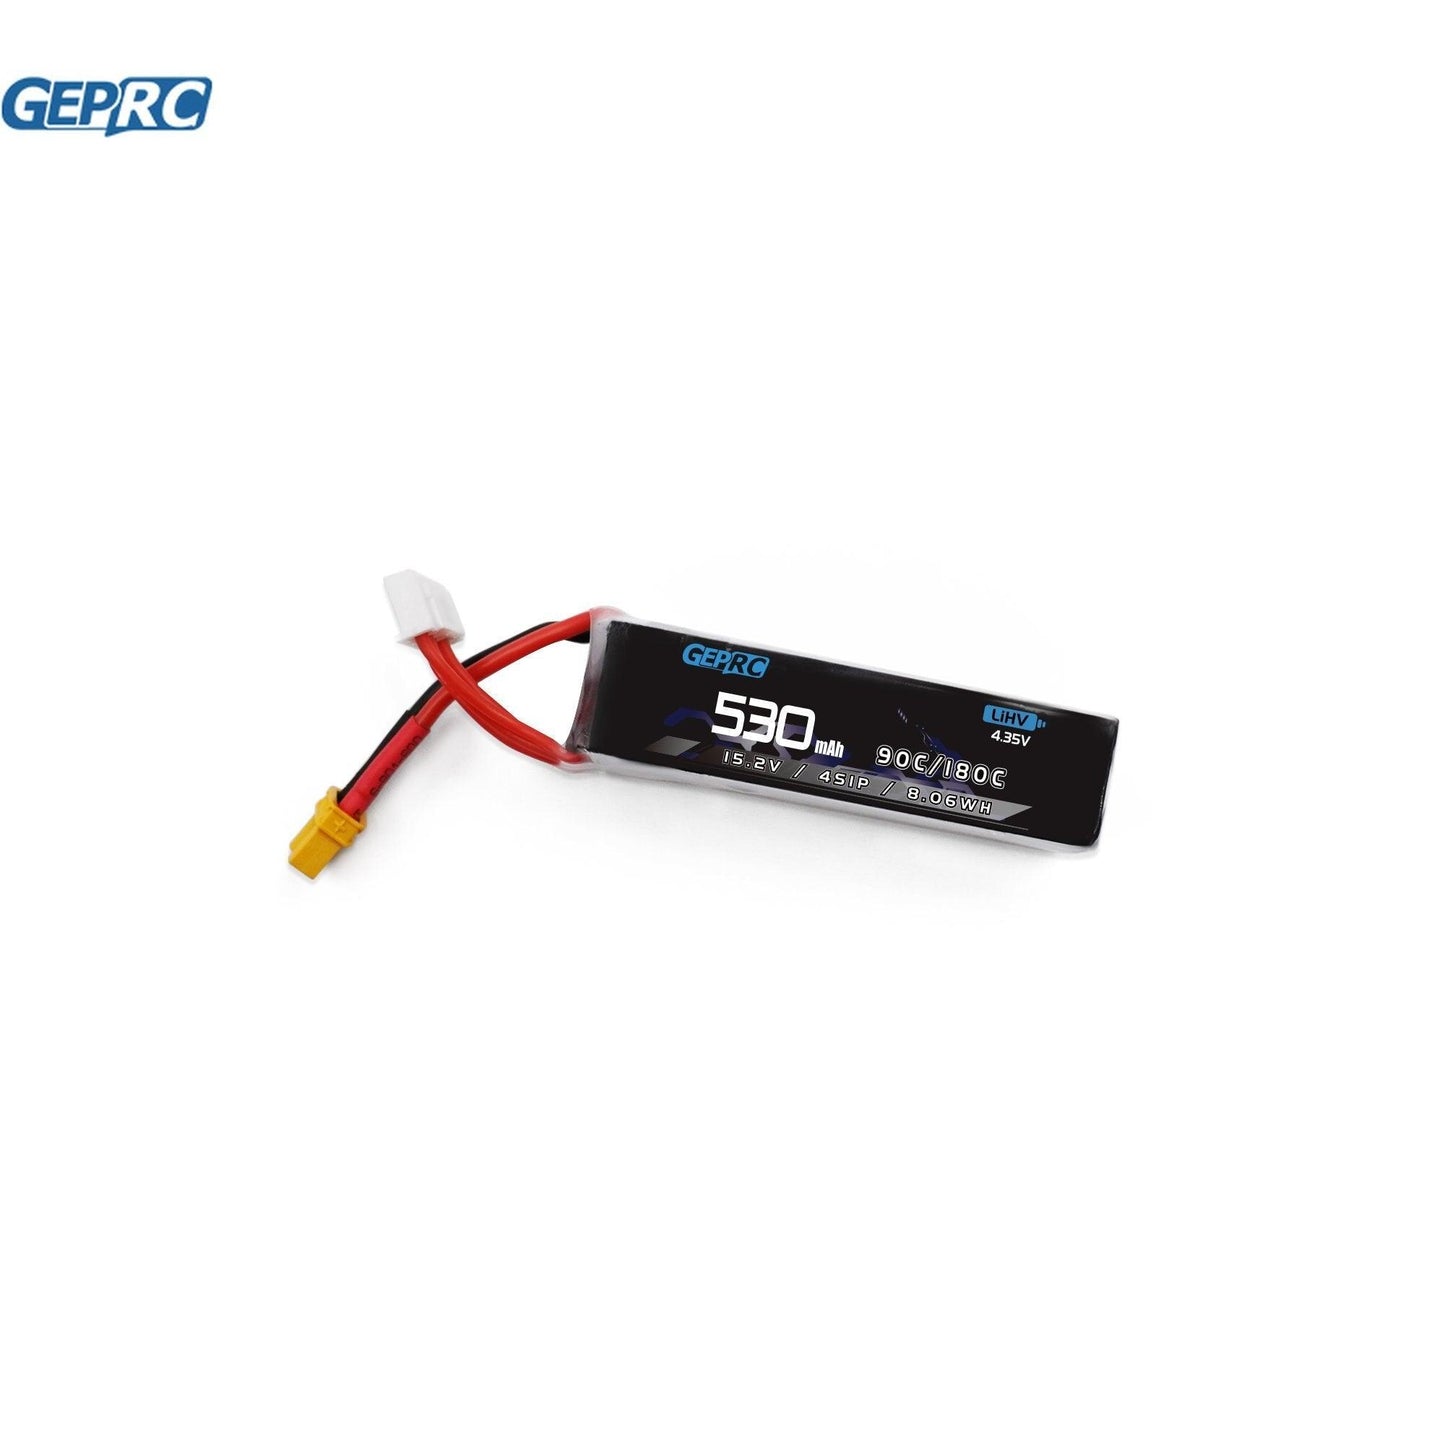 GEPRC 4S 530mAh LiPo Battery - 90/180C HV 3.8V/4.35V Battery Suitable For 2-3Inch Series Drone For RC FPV Quadcopter Accessories FPV Battery - RCDrone